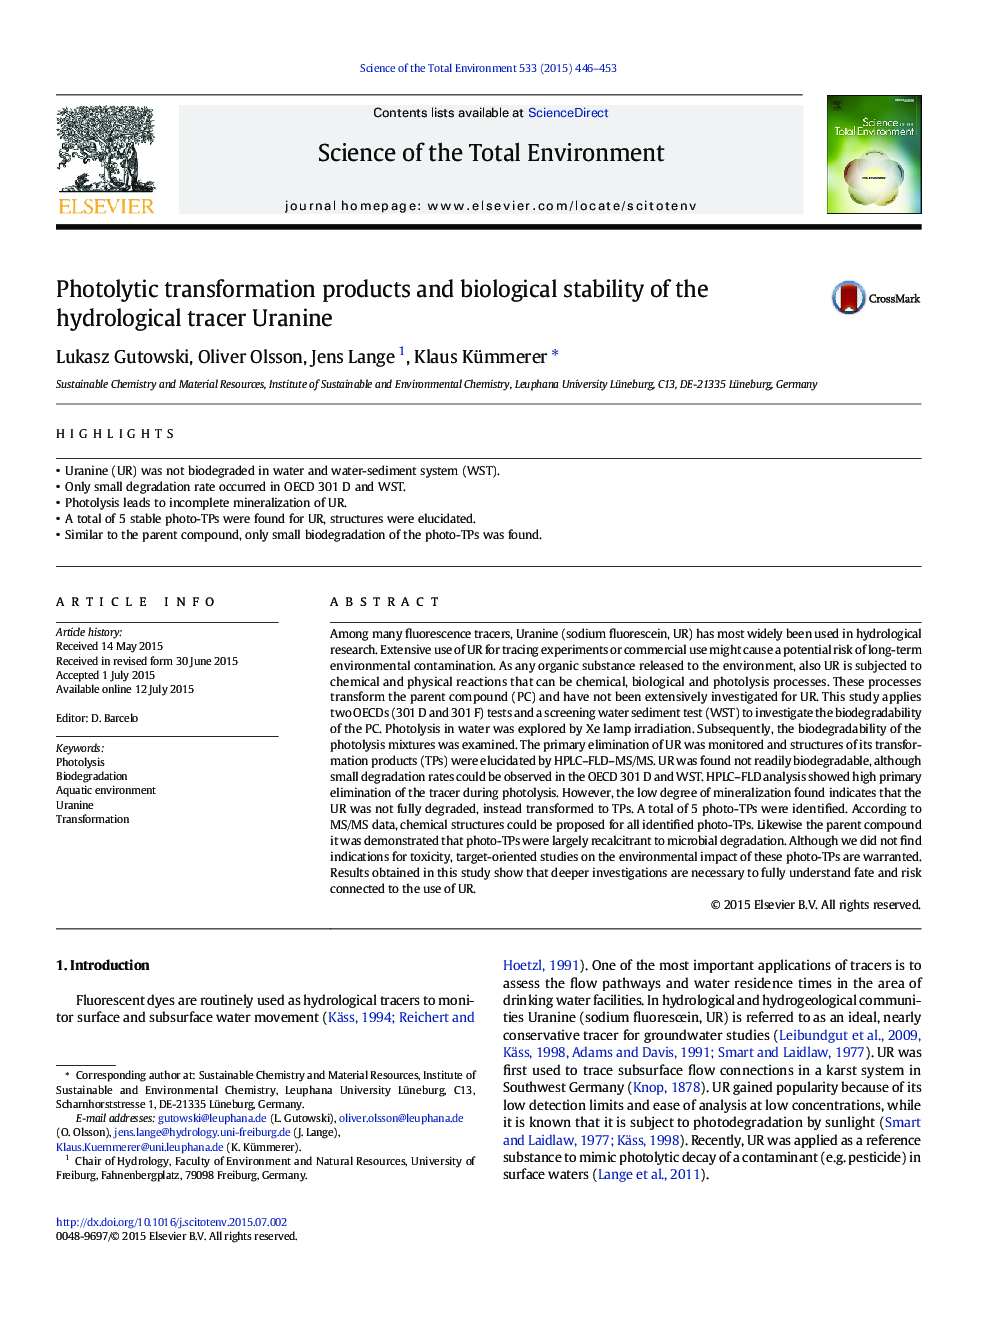 Photolytic transformation products and biological stability of the hydrological tracer Uranine